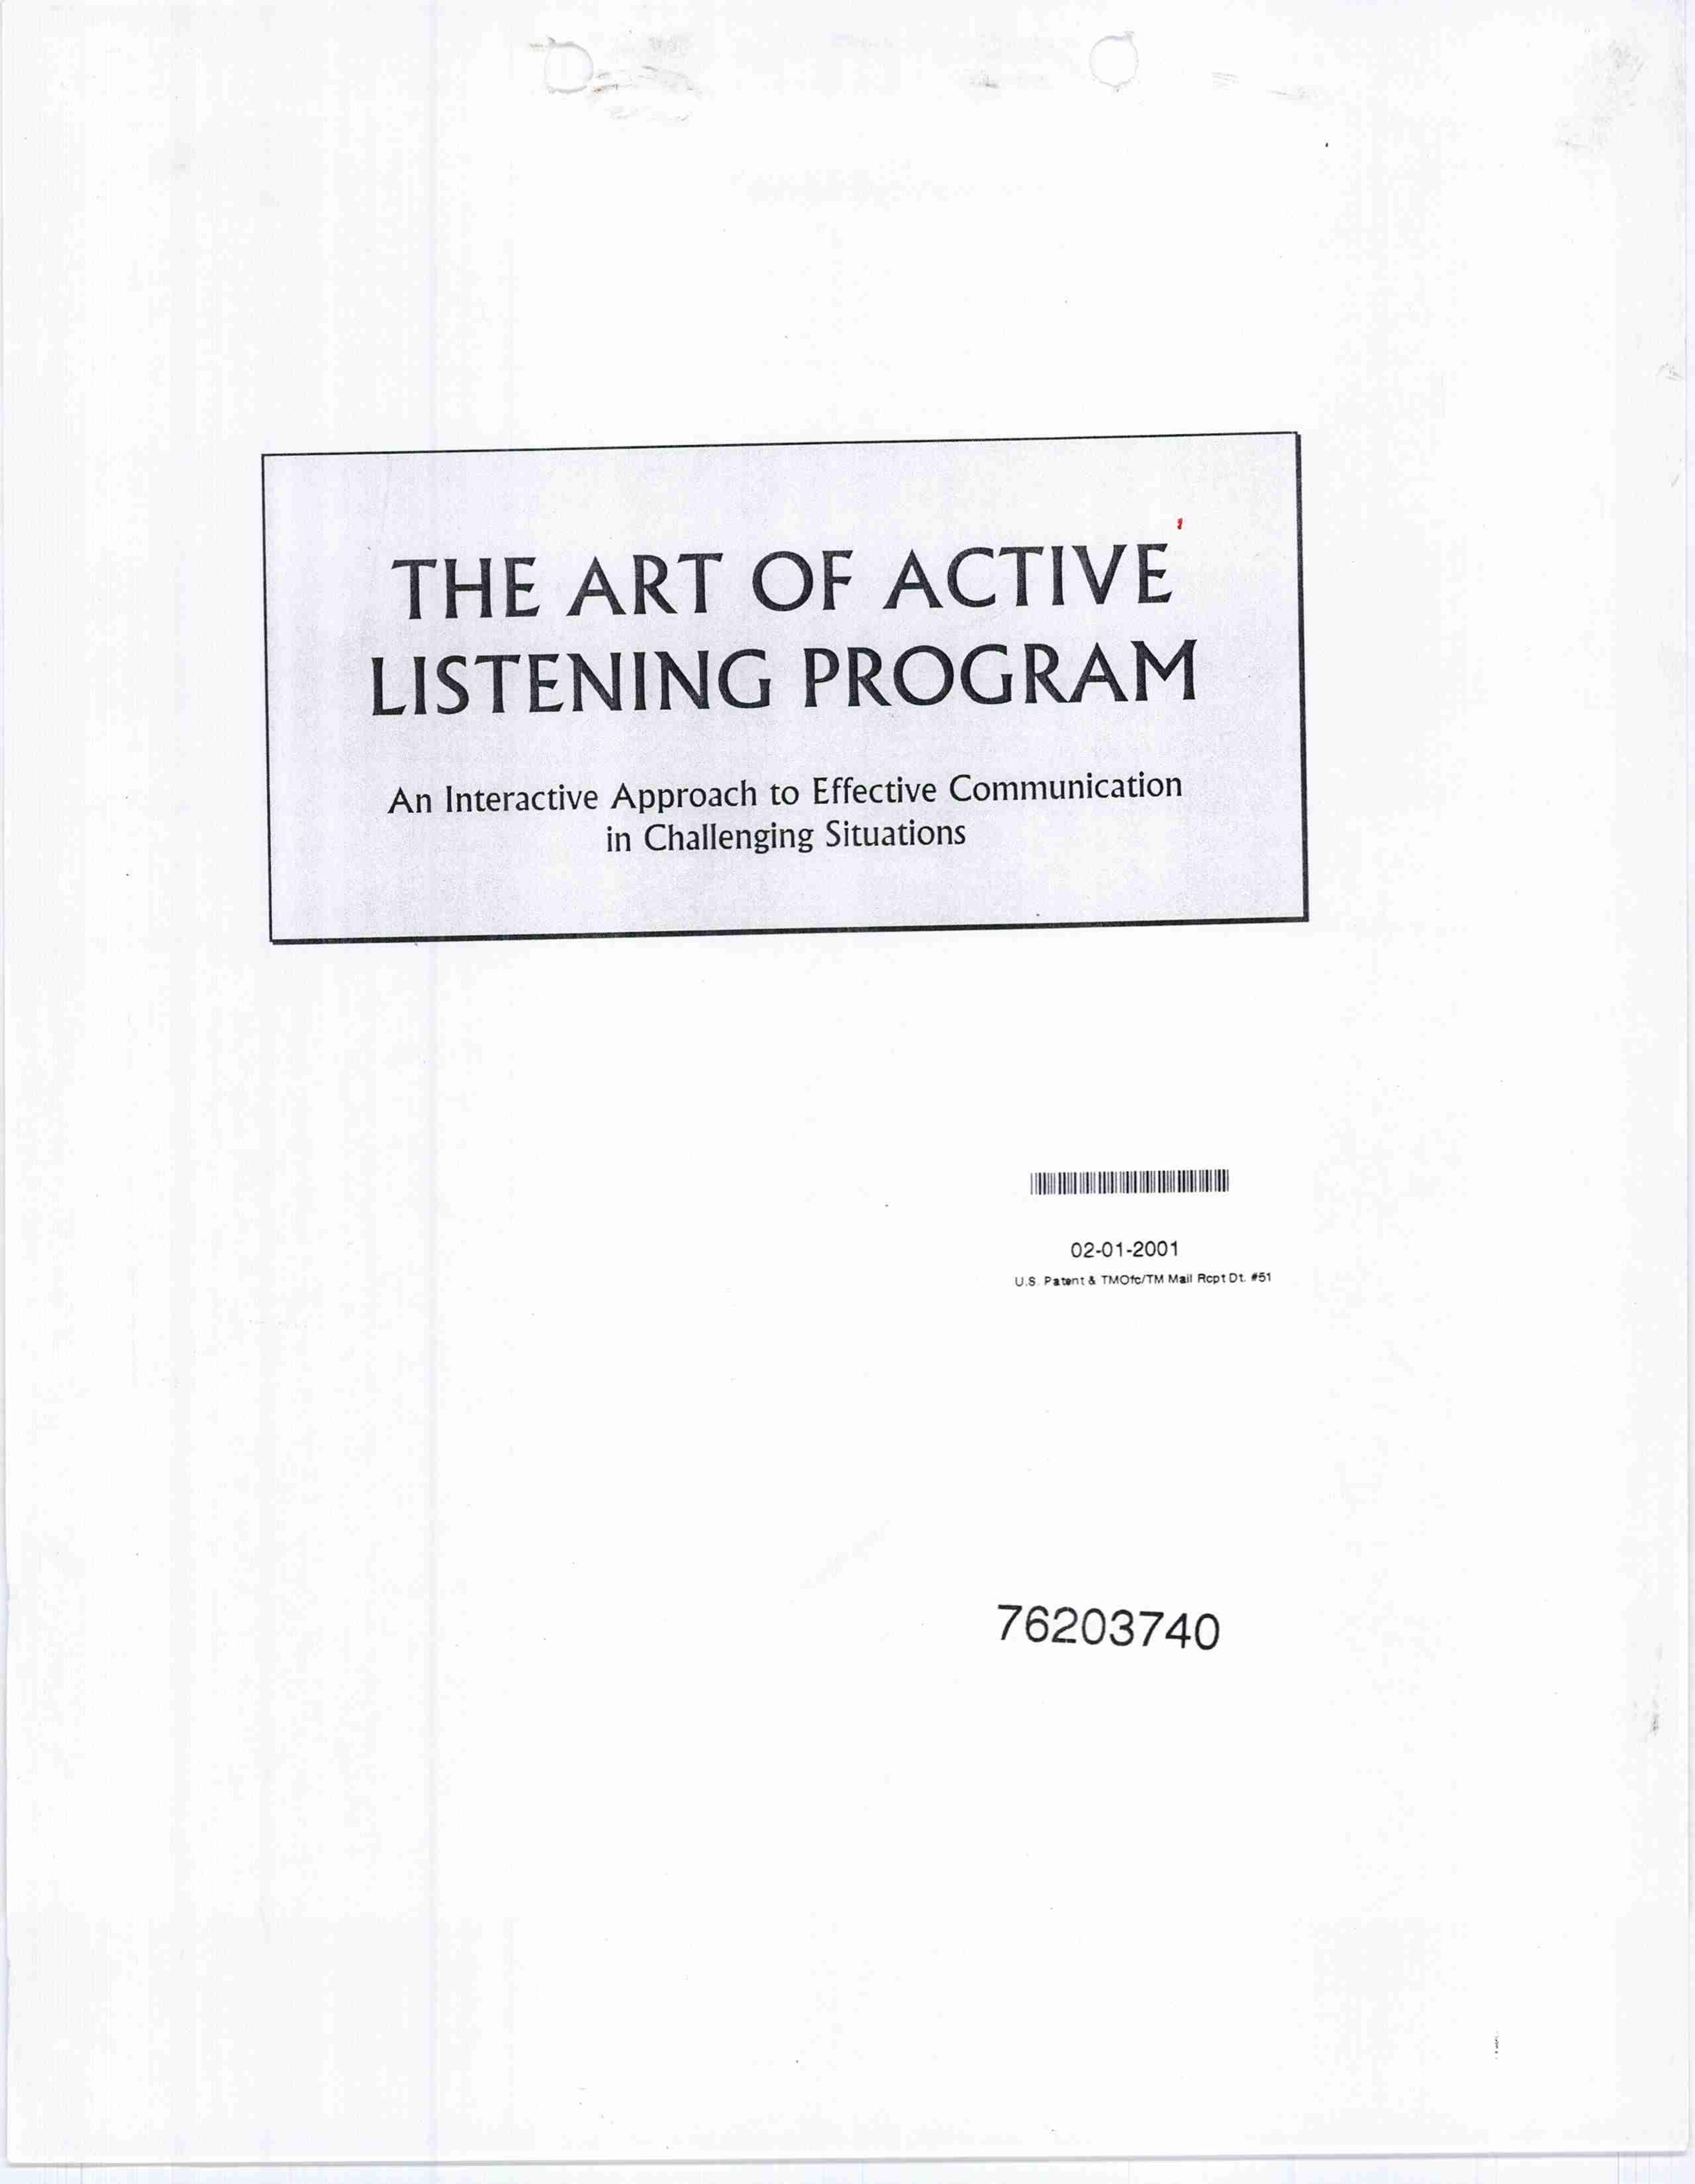  THE ART OF ACTIVE LISTENING